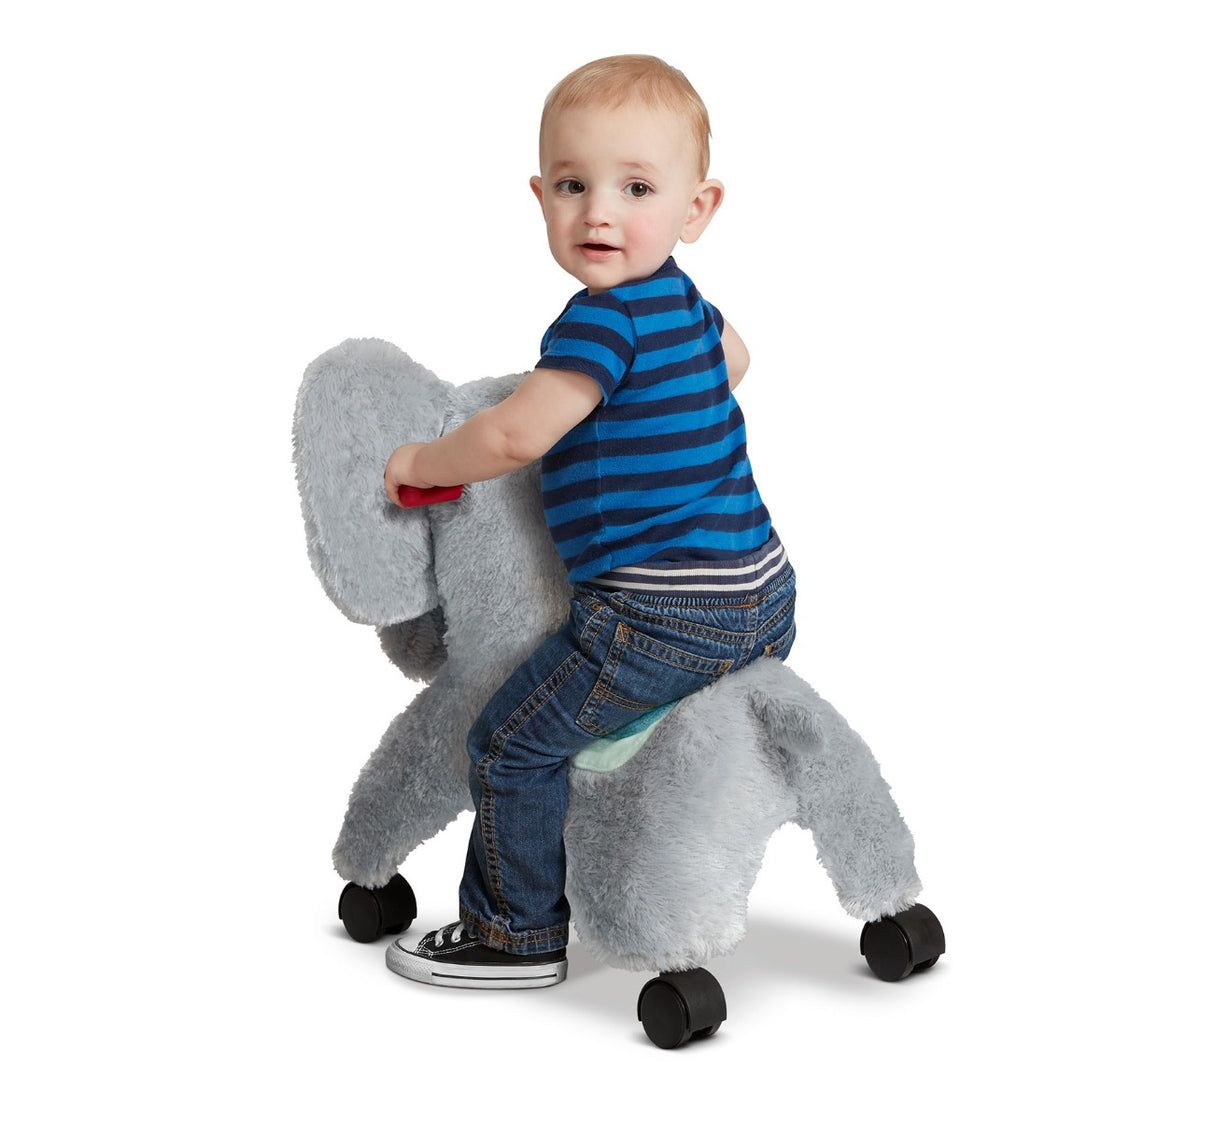 Toddler riding Ellie the Rolling Elephant